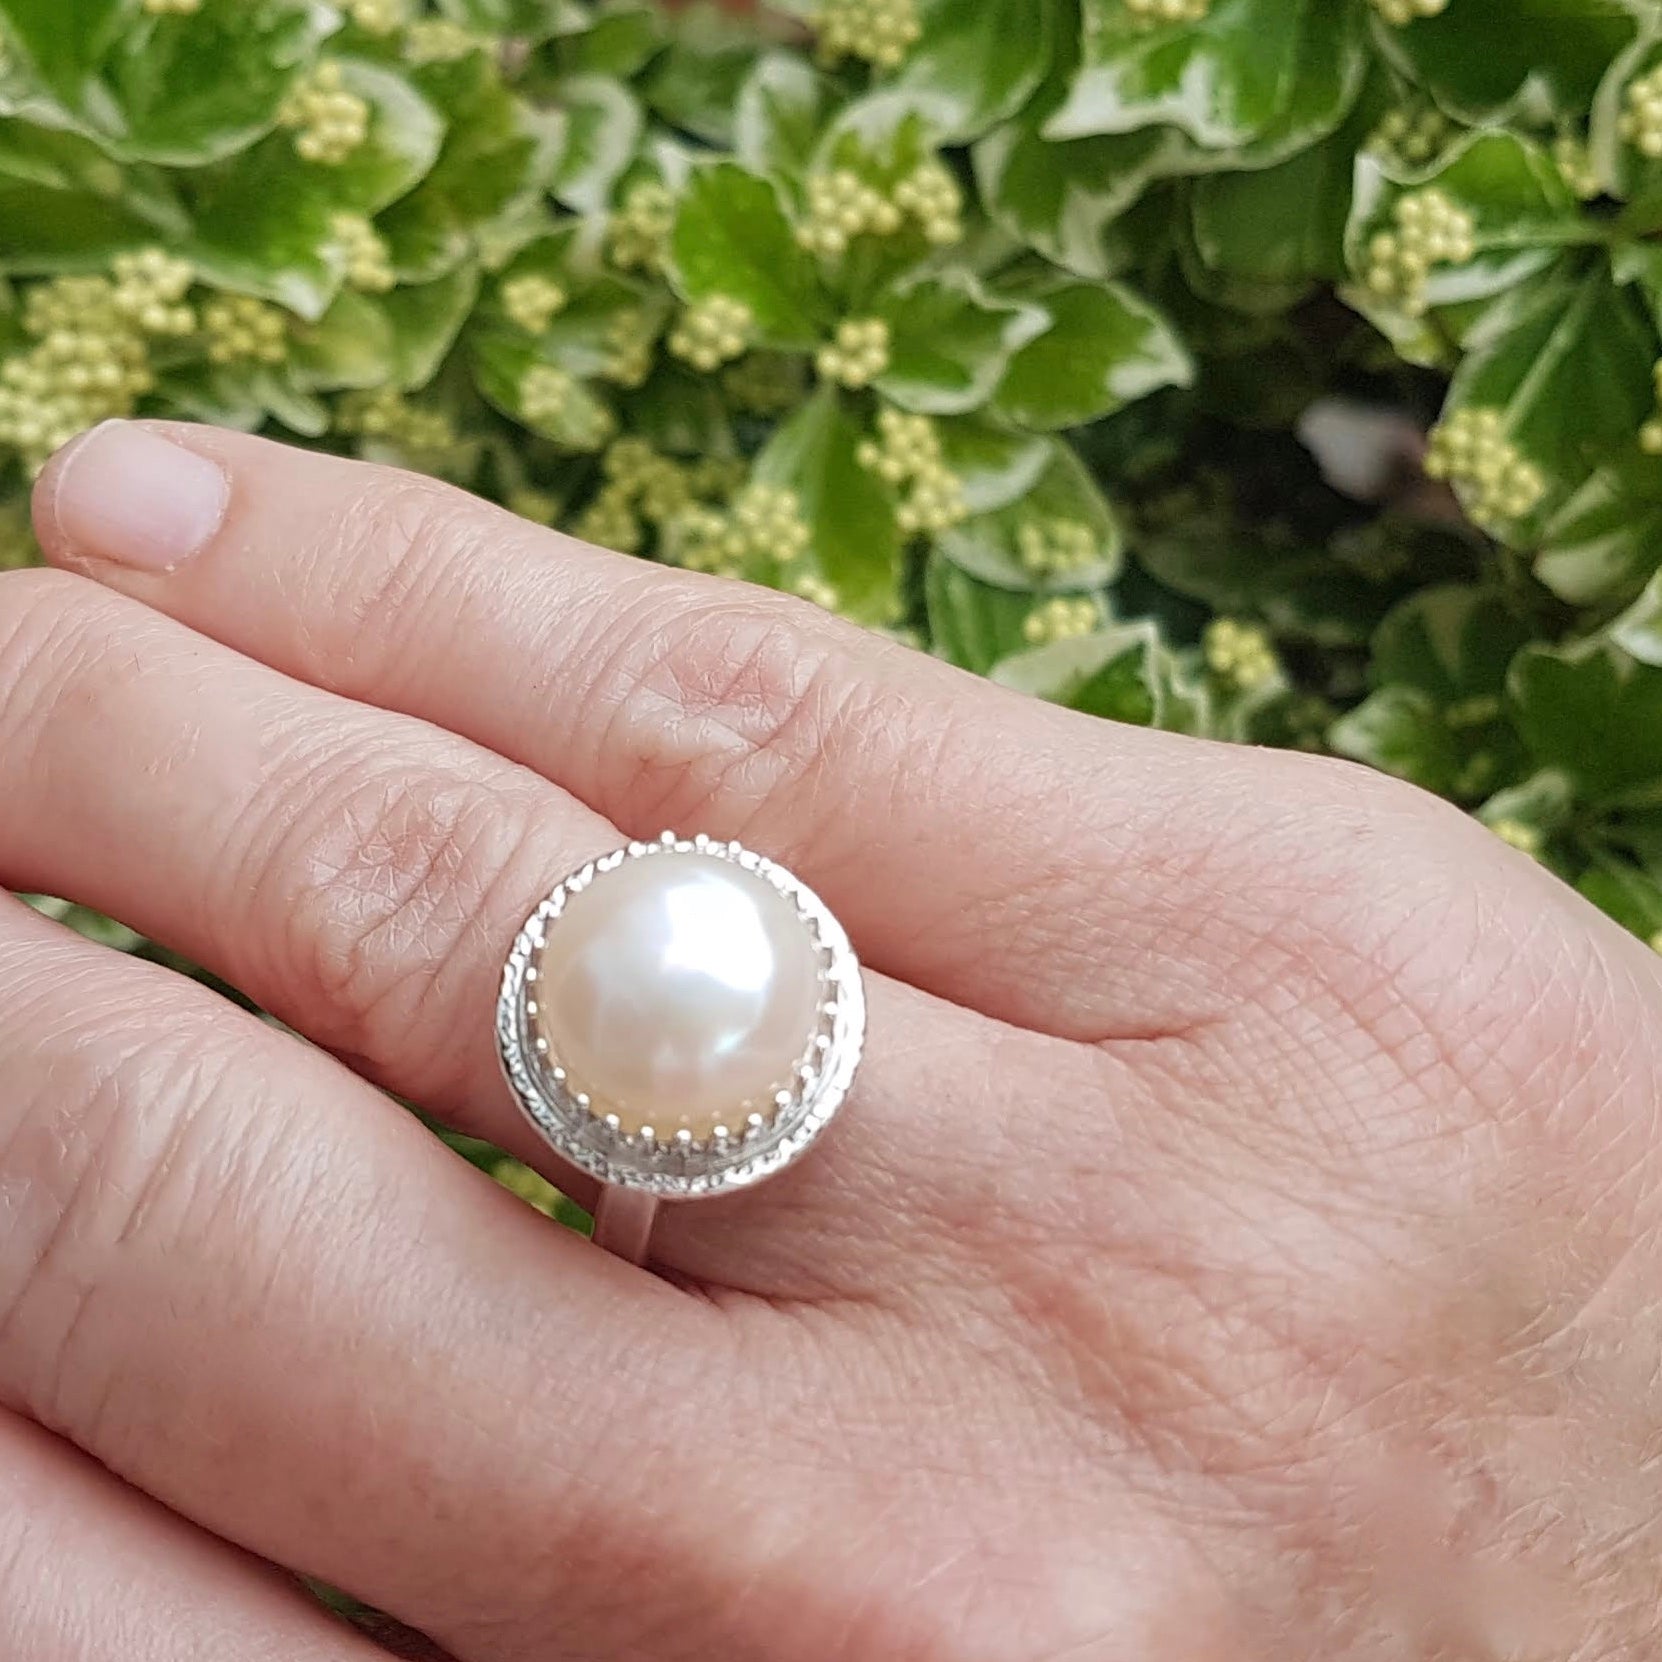 How to Choose Your Pearl Engagement Ring - PearlsOnly :: PearlsOnly | Save  up to 80% with Pearls Only